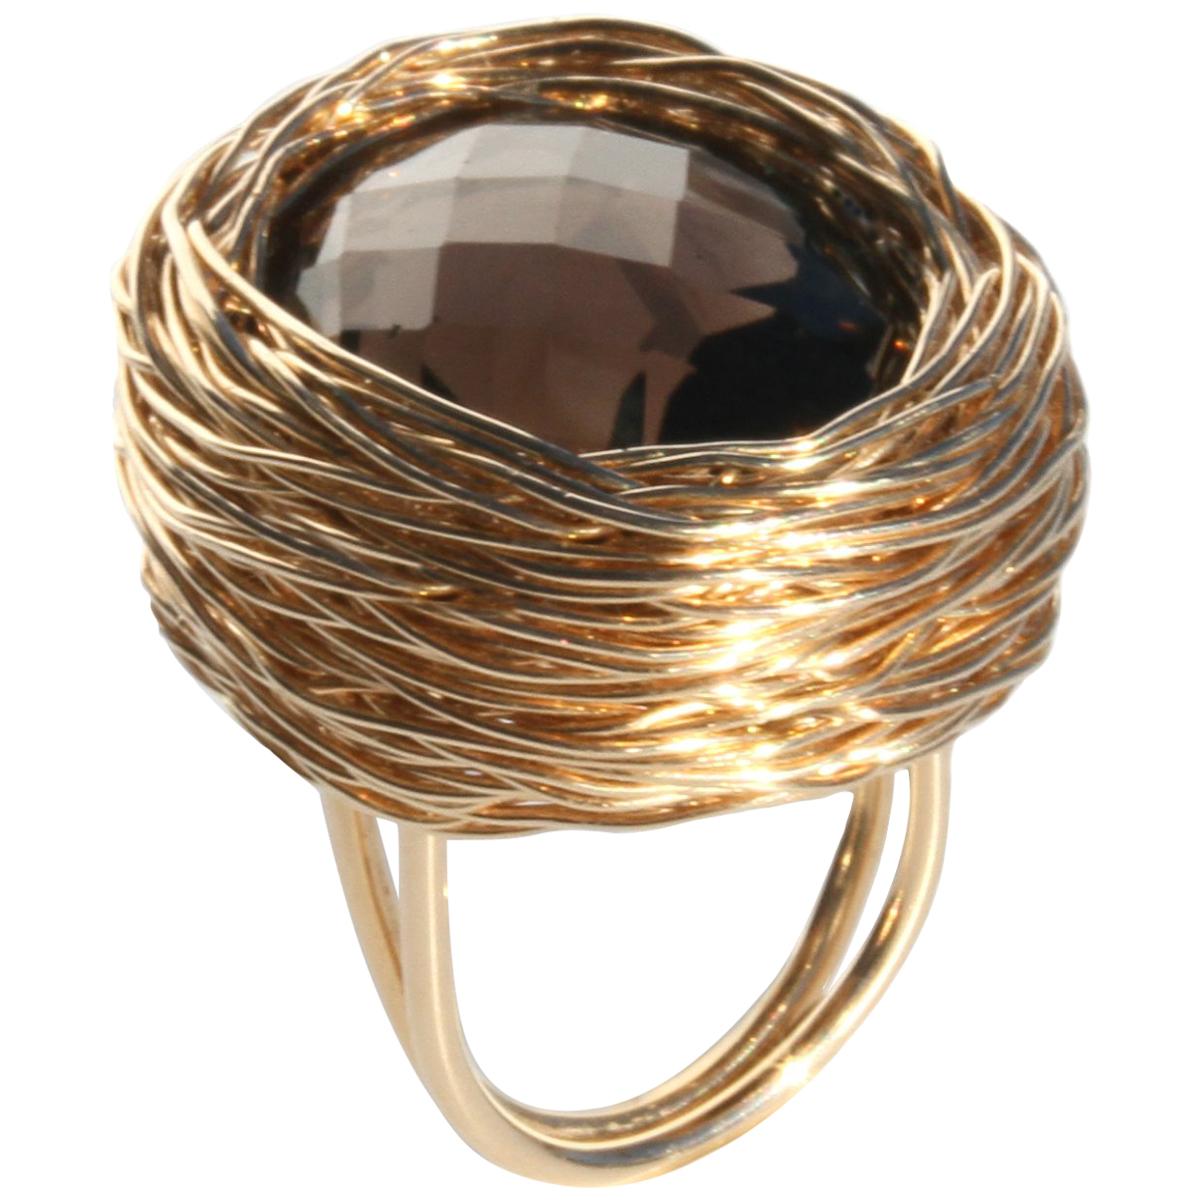 Deep Faceted Oval Smoky Quartz in Gold Statement Ring by Sheila Westera